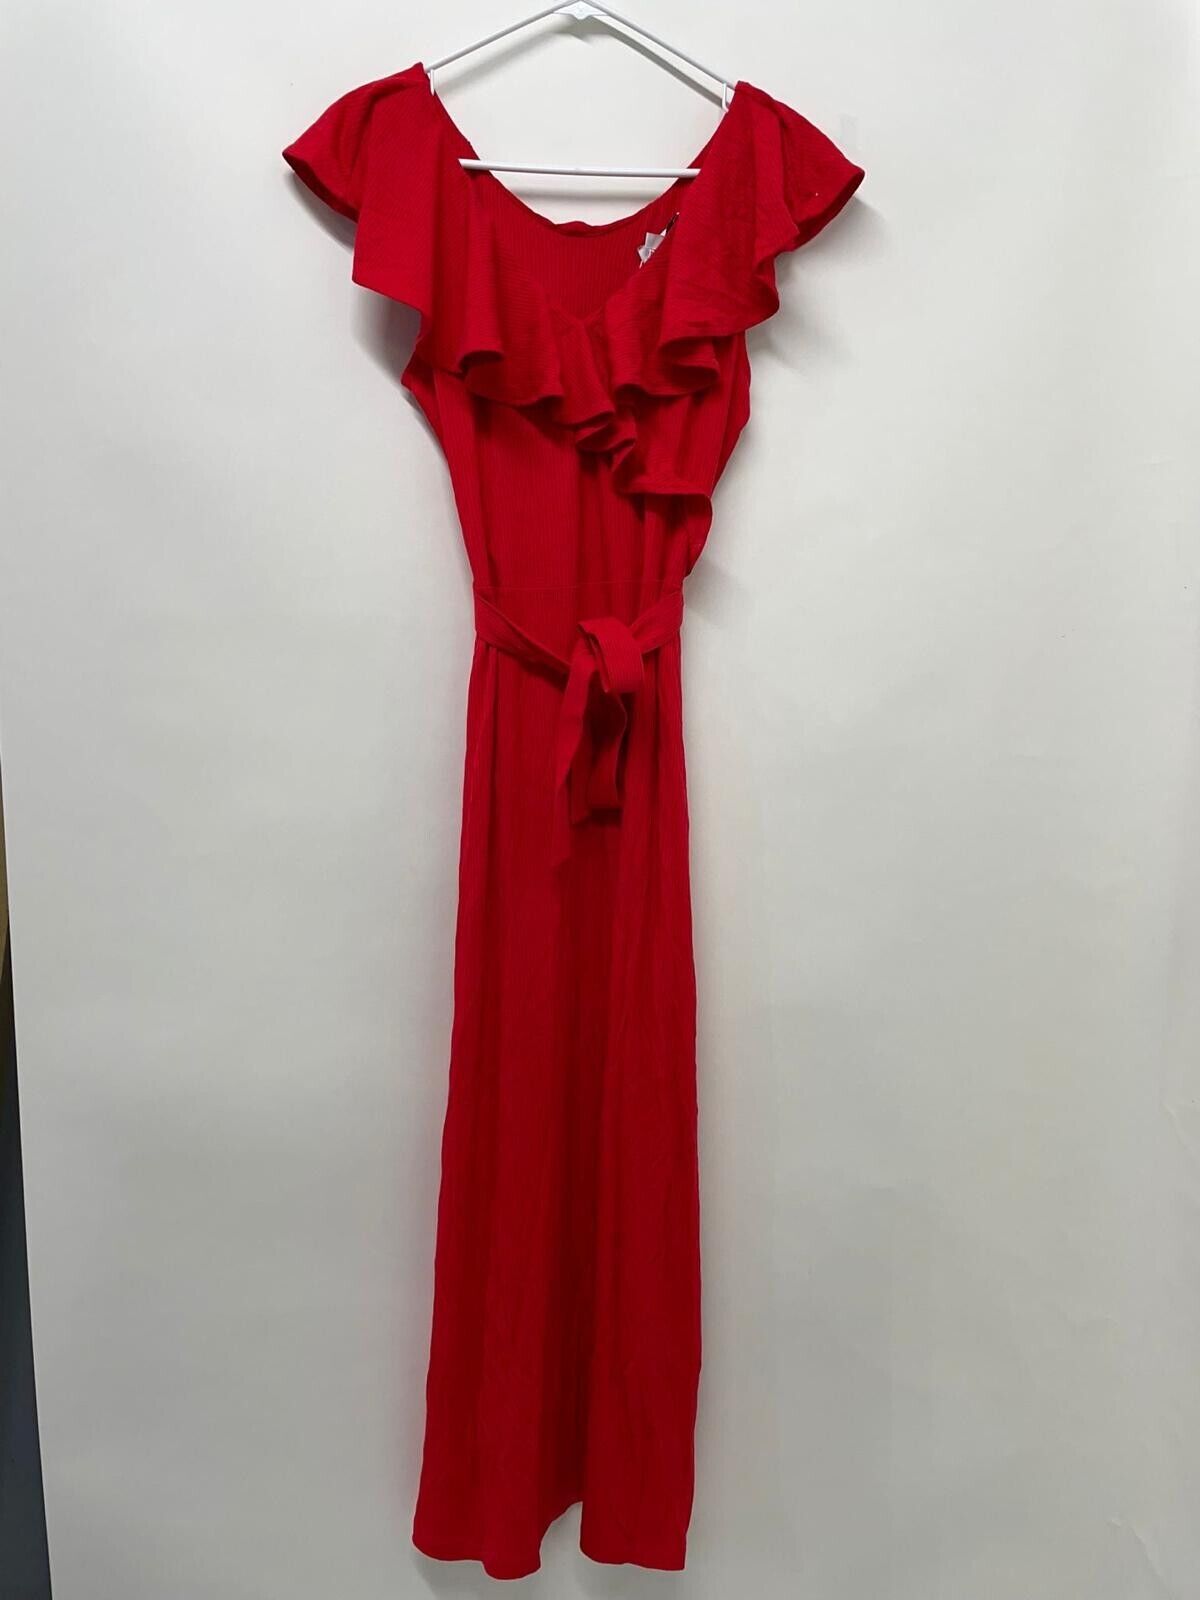 & Other Stories Womens M Red Ribbed Belted Wrap Ruffle Surplice Neck Midi Dress